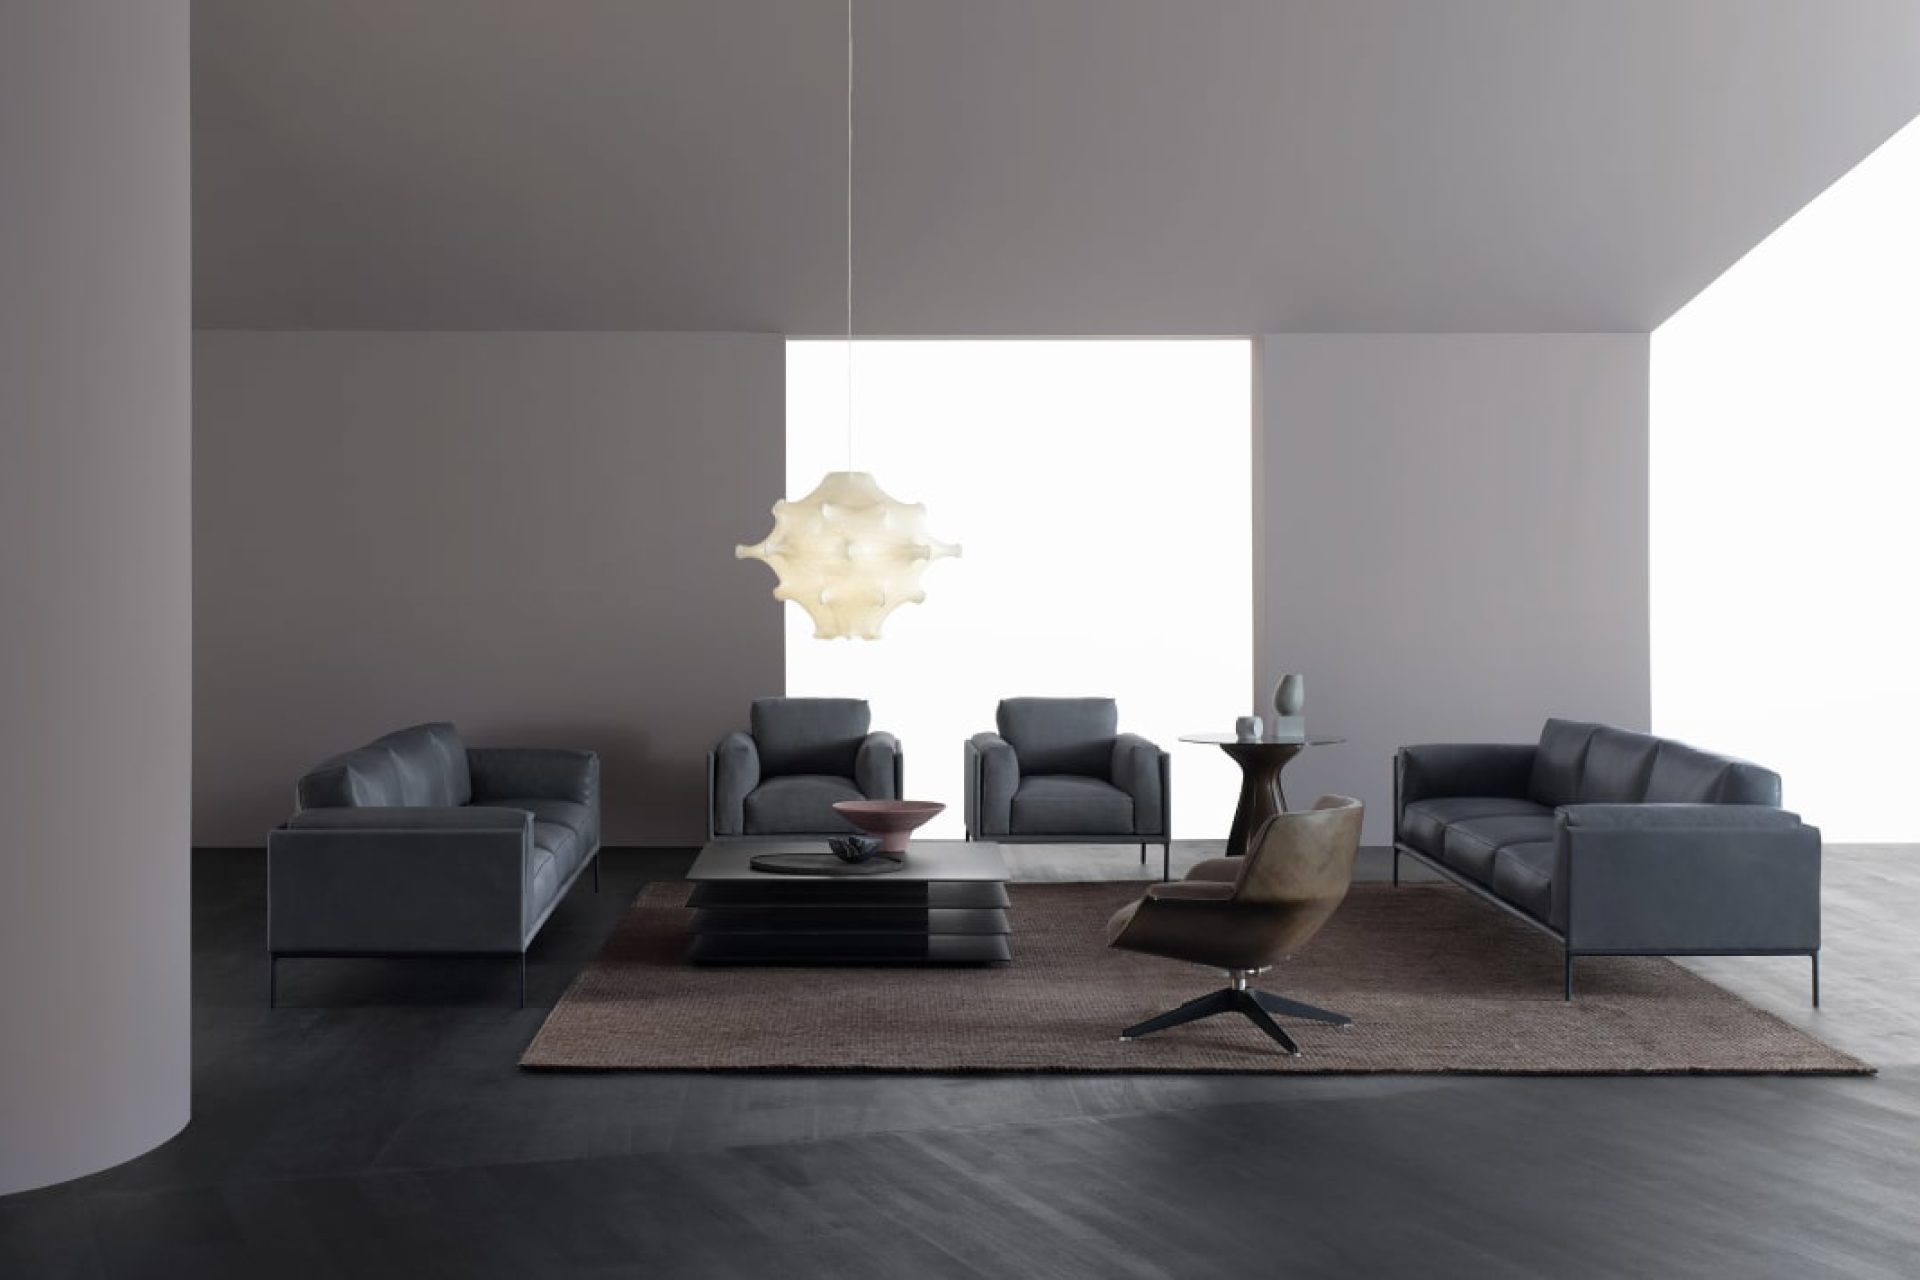 Living room furniture including two dark grey sofas